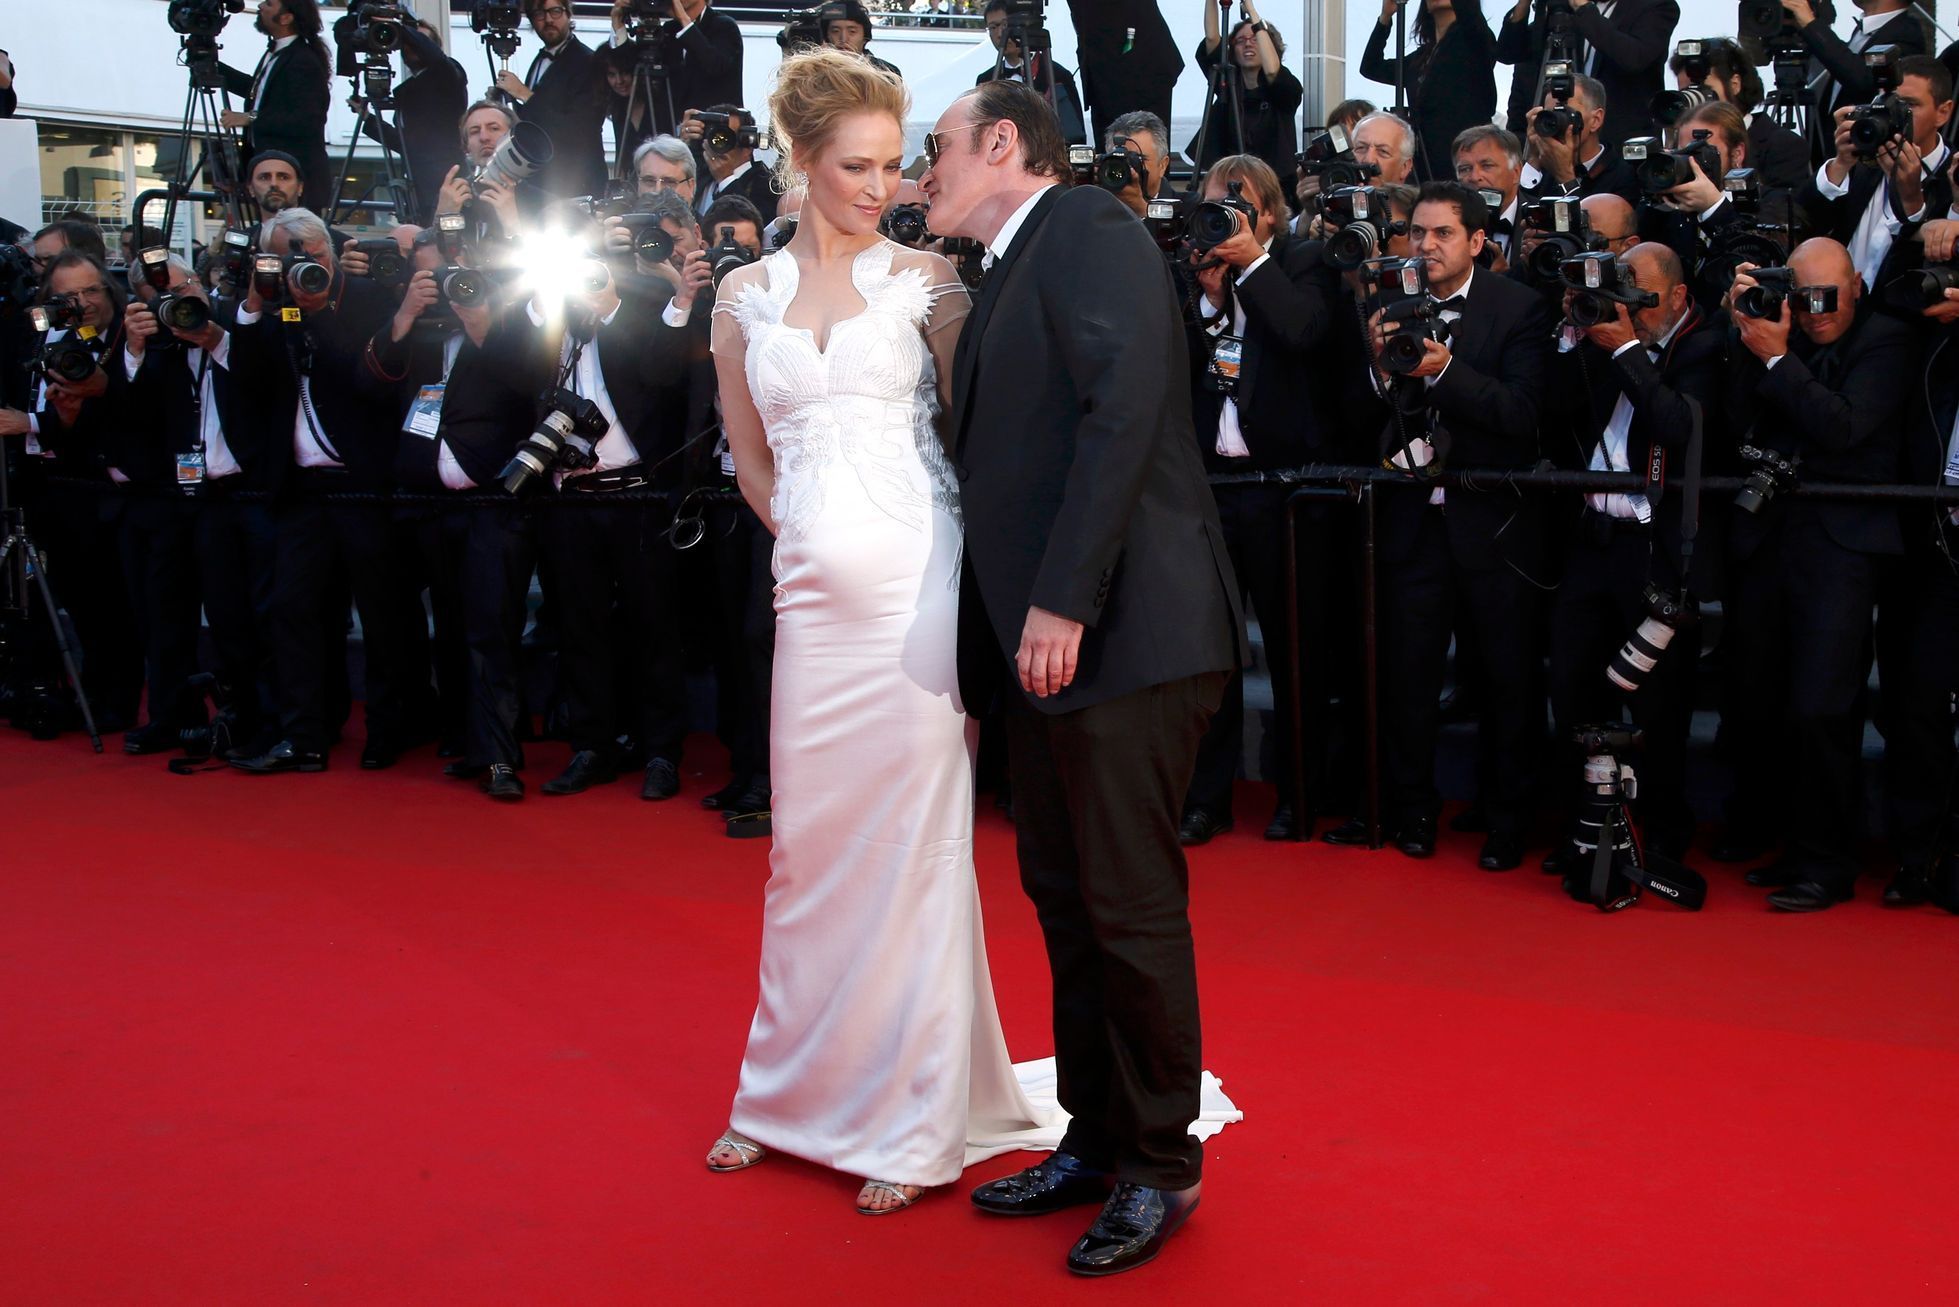 Director Quentin Tarantino and actress Uma Thurman pose on the red carpet as they arrive at the closing ceremony of the 67th Cannes Film Festival